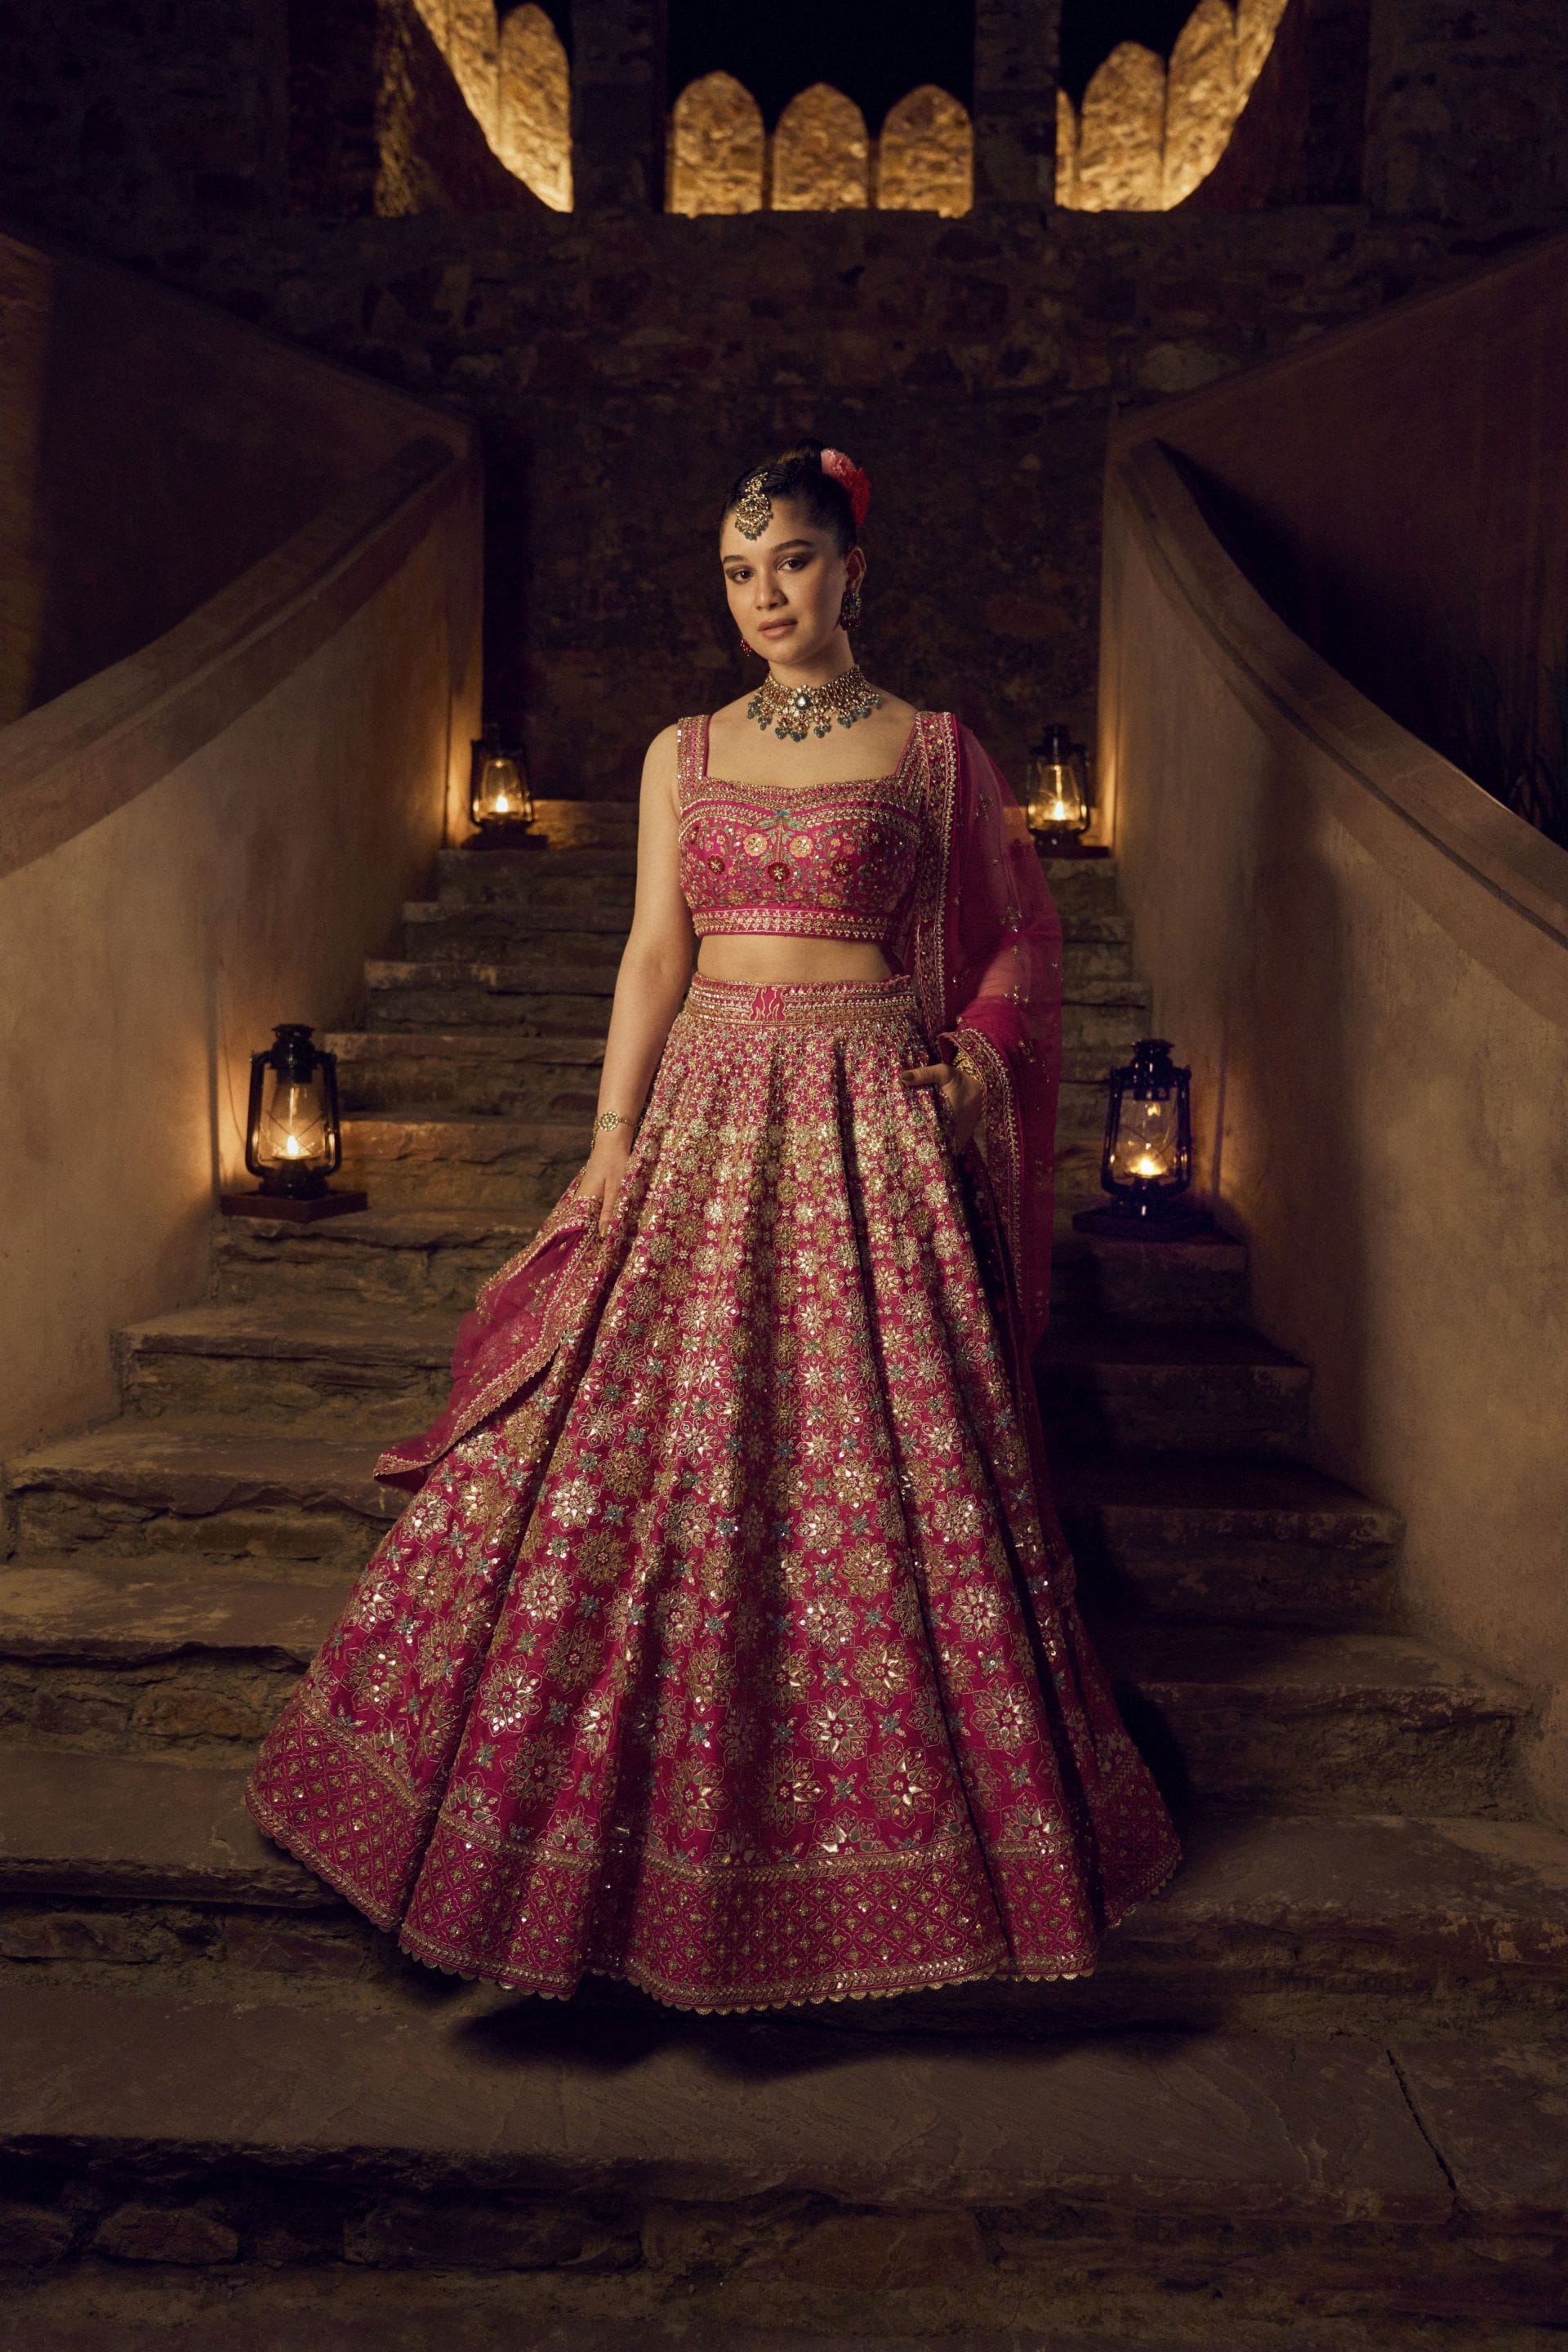 Top Trends In Bridal Lehengas For 2021